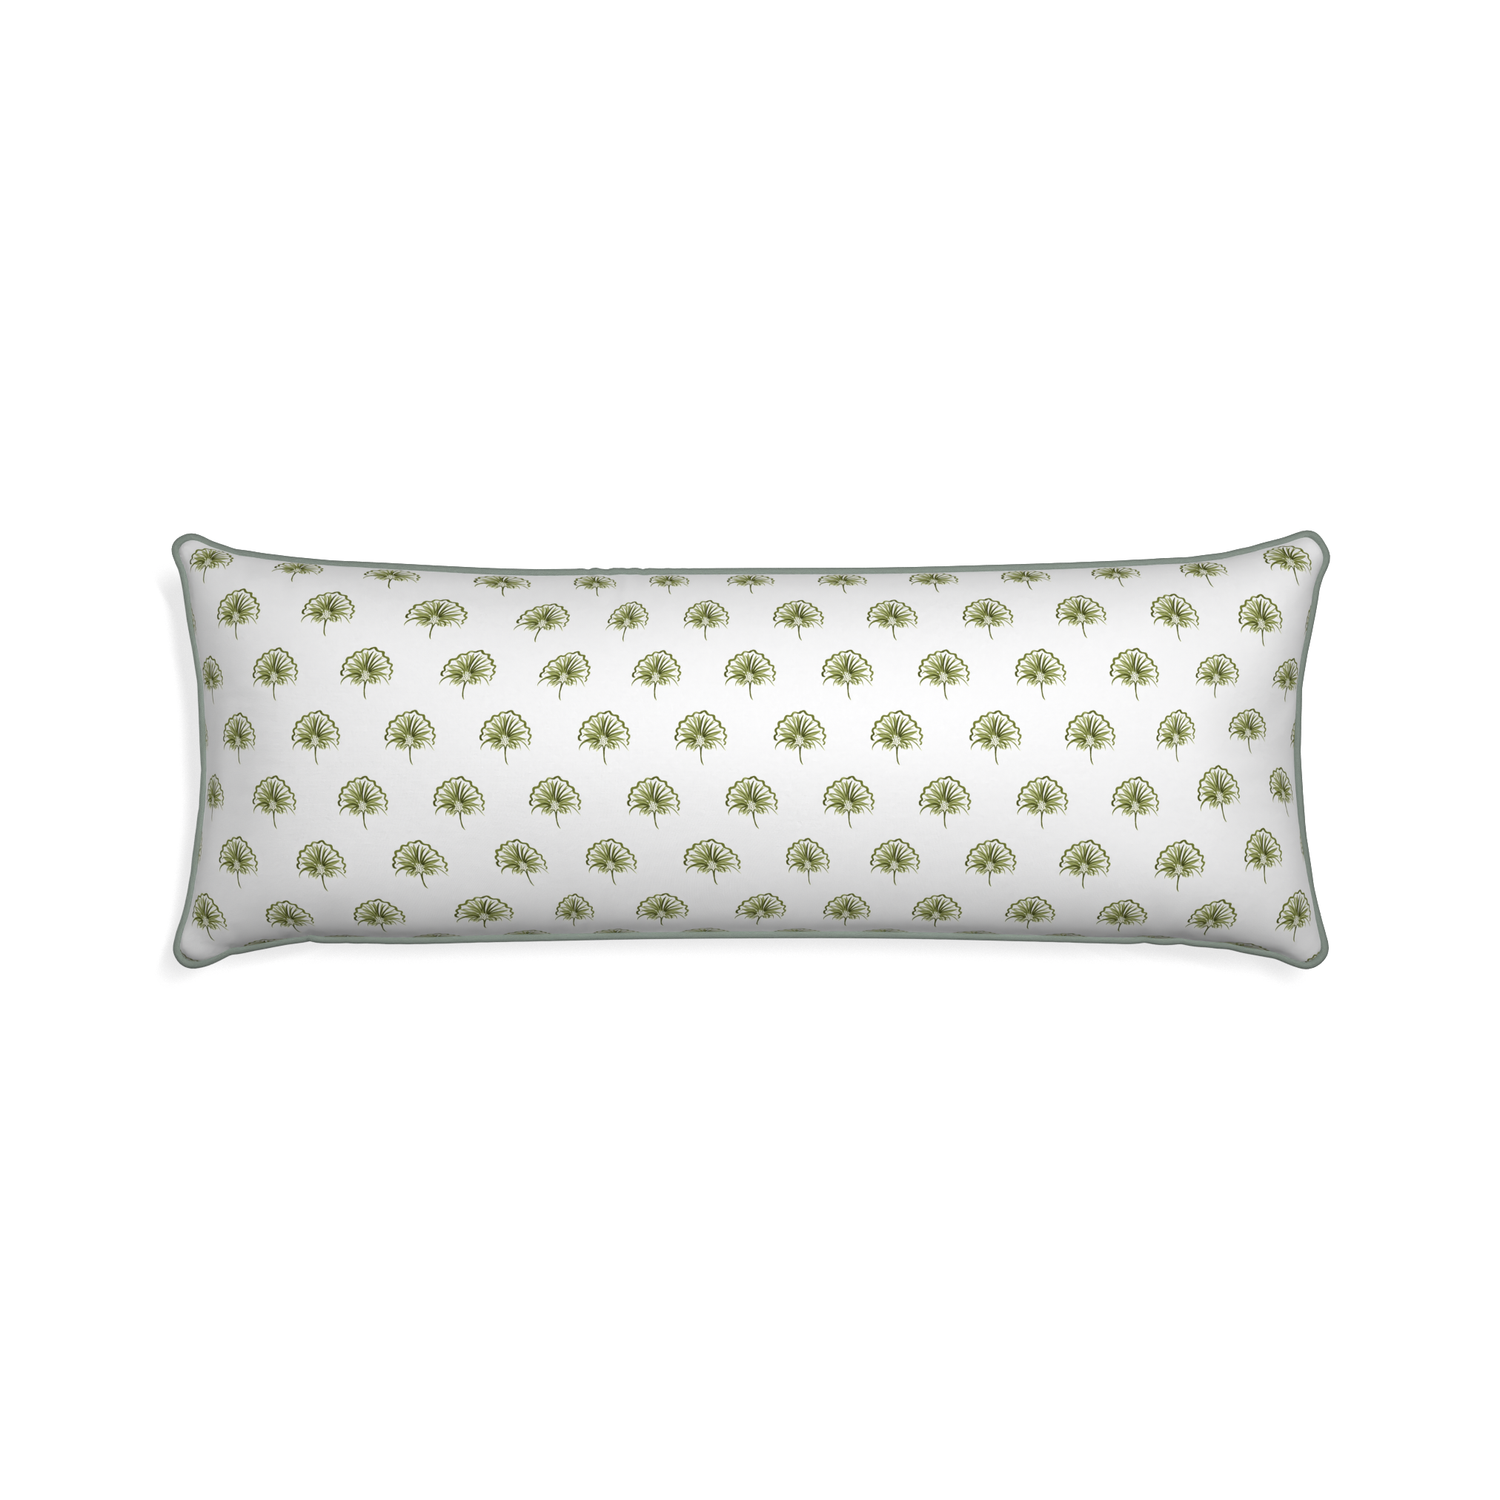 Xl-lumbar penelope moss custom green floralpillow with sage piping on white background